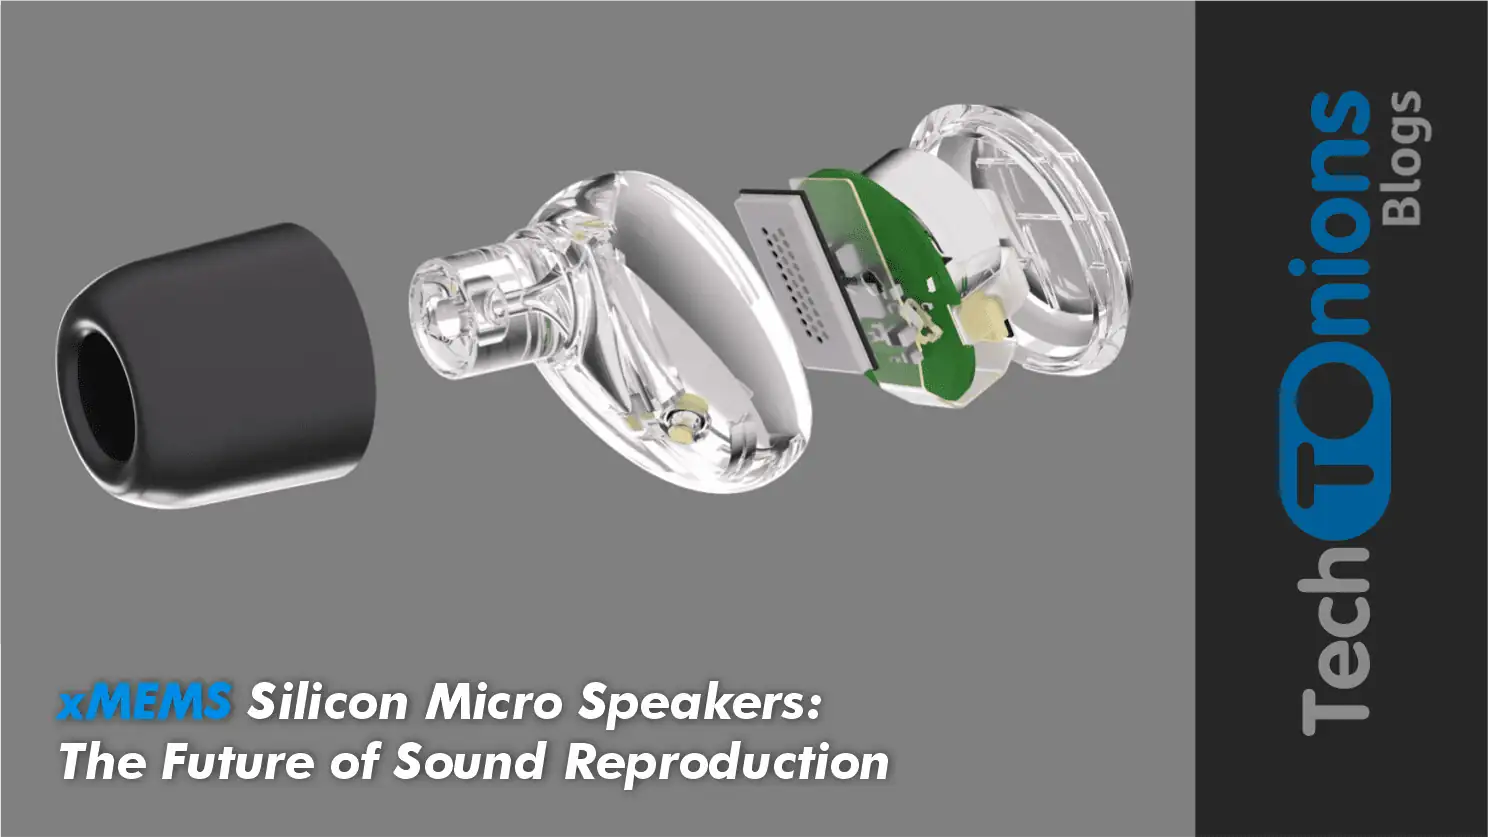 xMEMS Silicon Micro Speakers The Future of Sound Reproduction Fetured Image